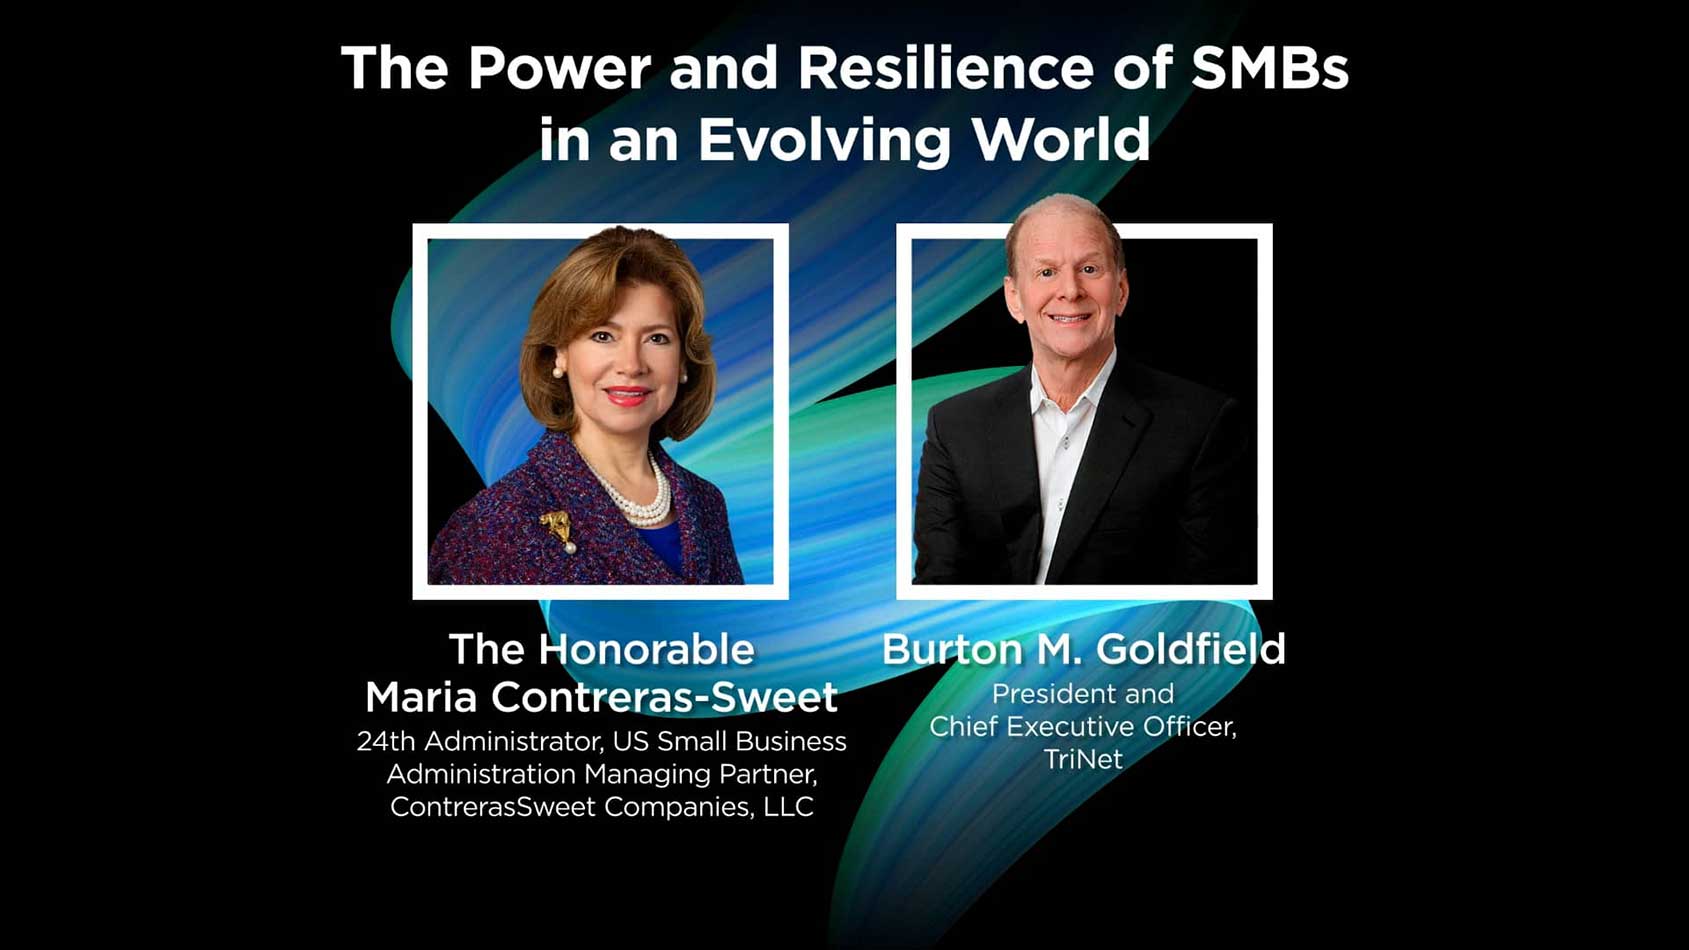 The Power and Resilience of SMBs in an Evolving World